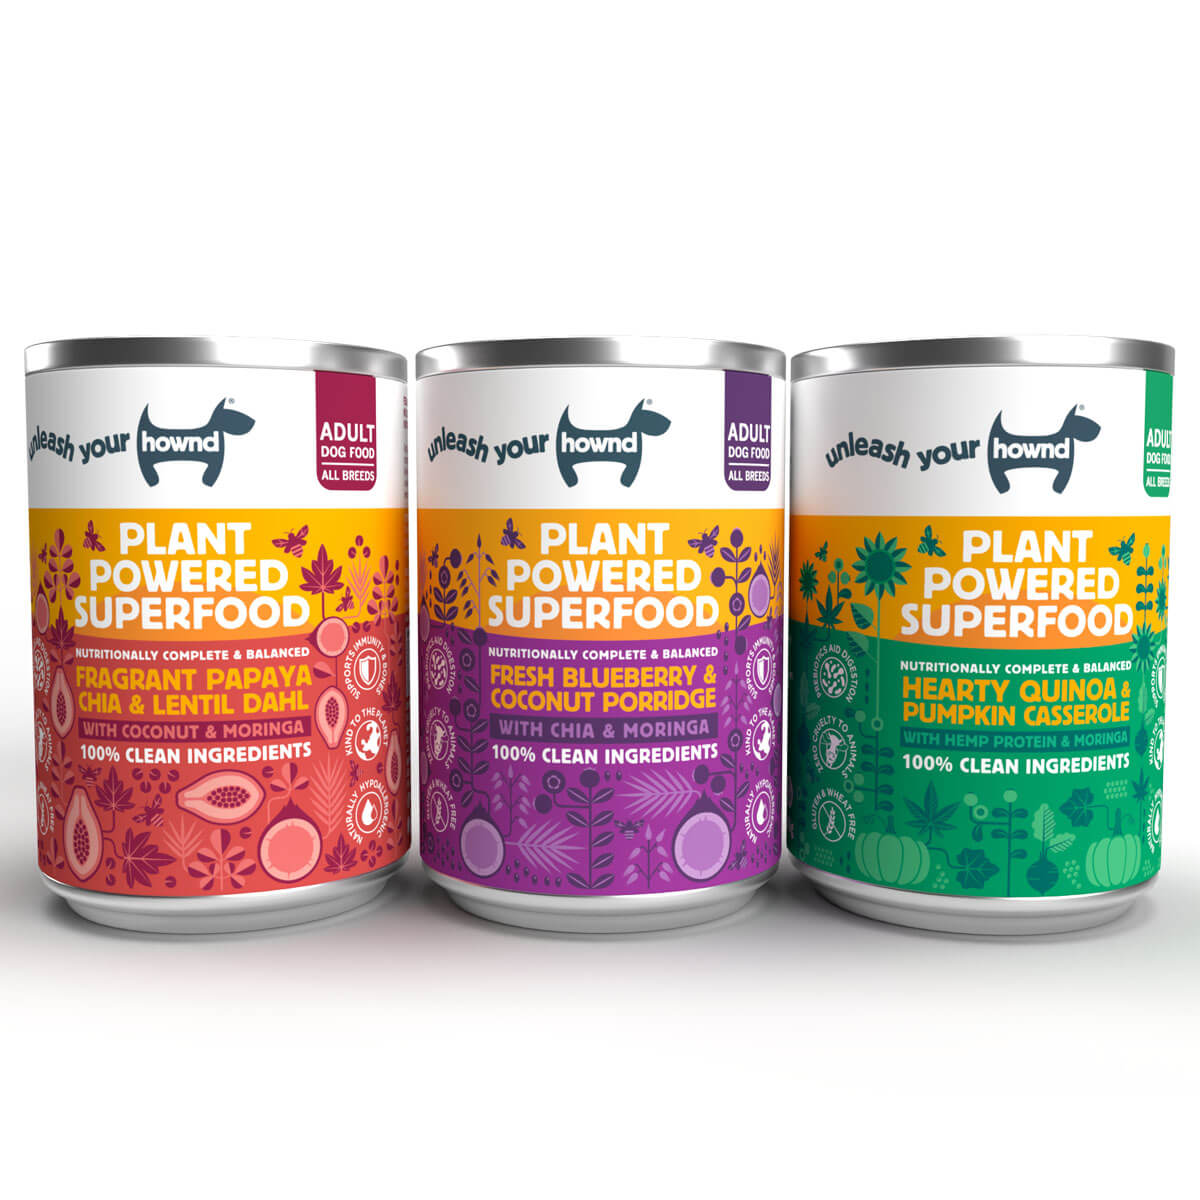 Fragrant Papaya Chia & Lentil Dahl With Coconut & Moringa (400g) x 12 - Hownd, 3 flavours of hypoallergenic wet dog food